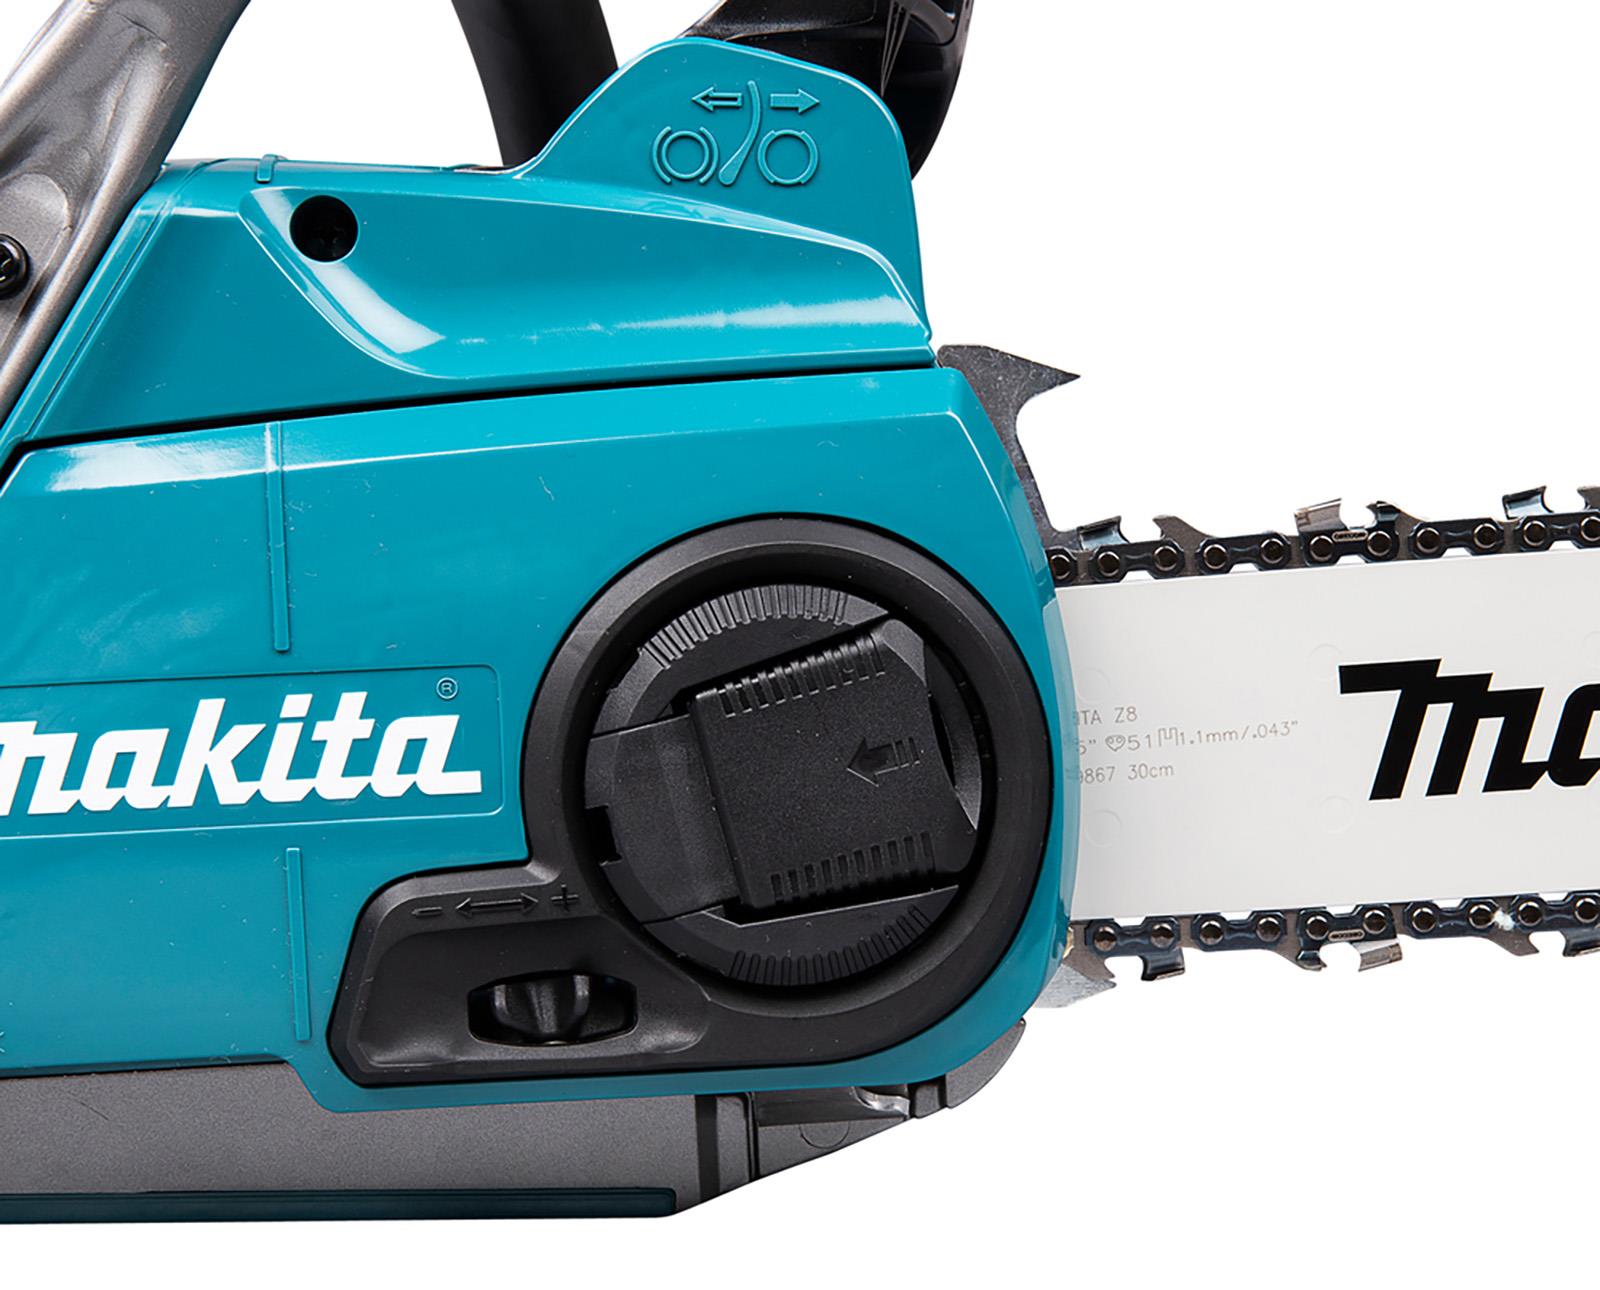 Makita Chainsaw Heavy Duty 30cm 12" 40V XGT Brushless Cordless Garden Tree Cutting Pruning Bare Unit Body Only UC014GZ